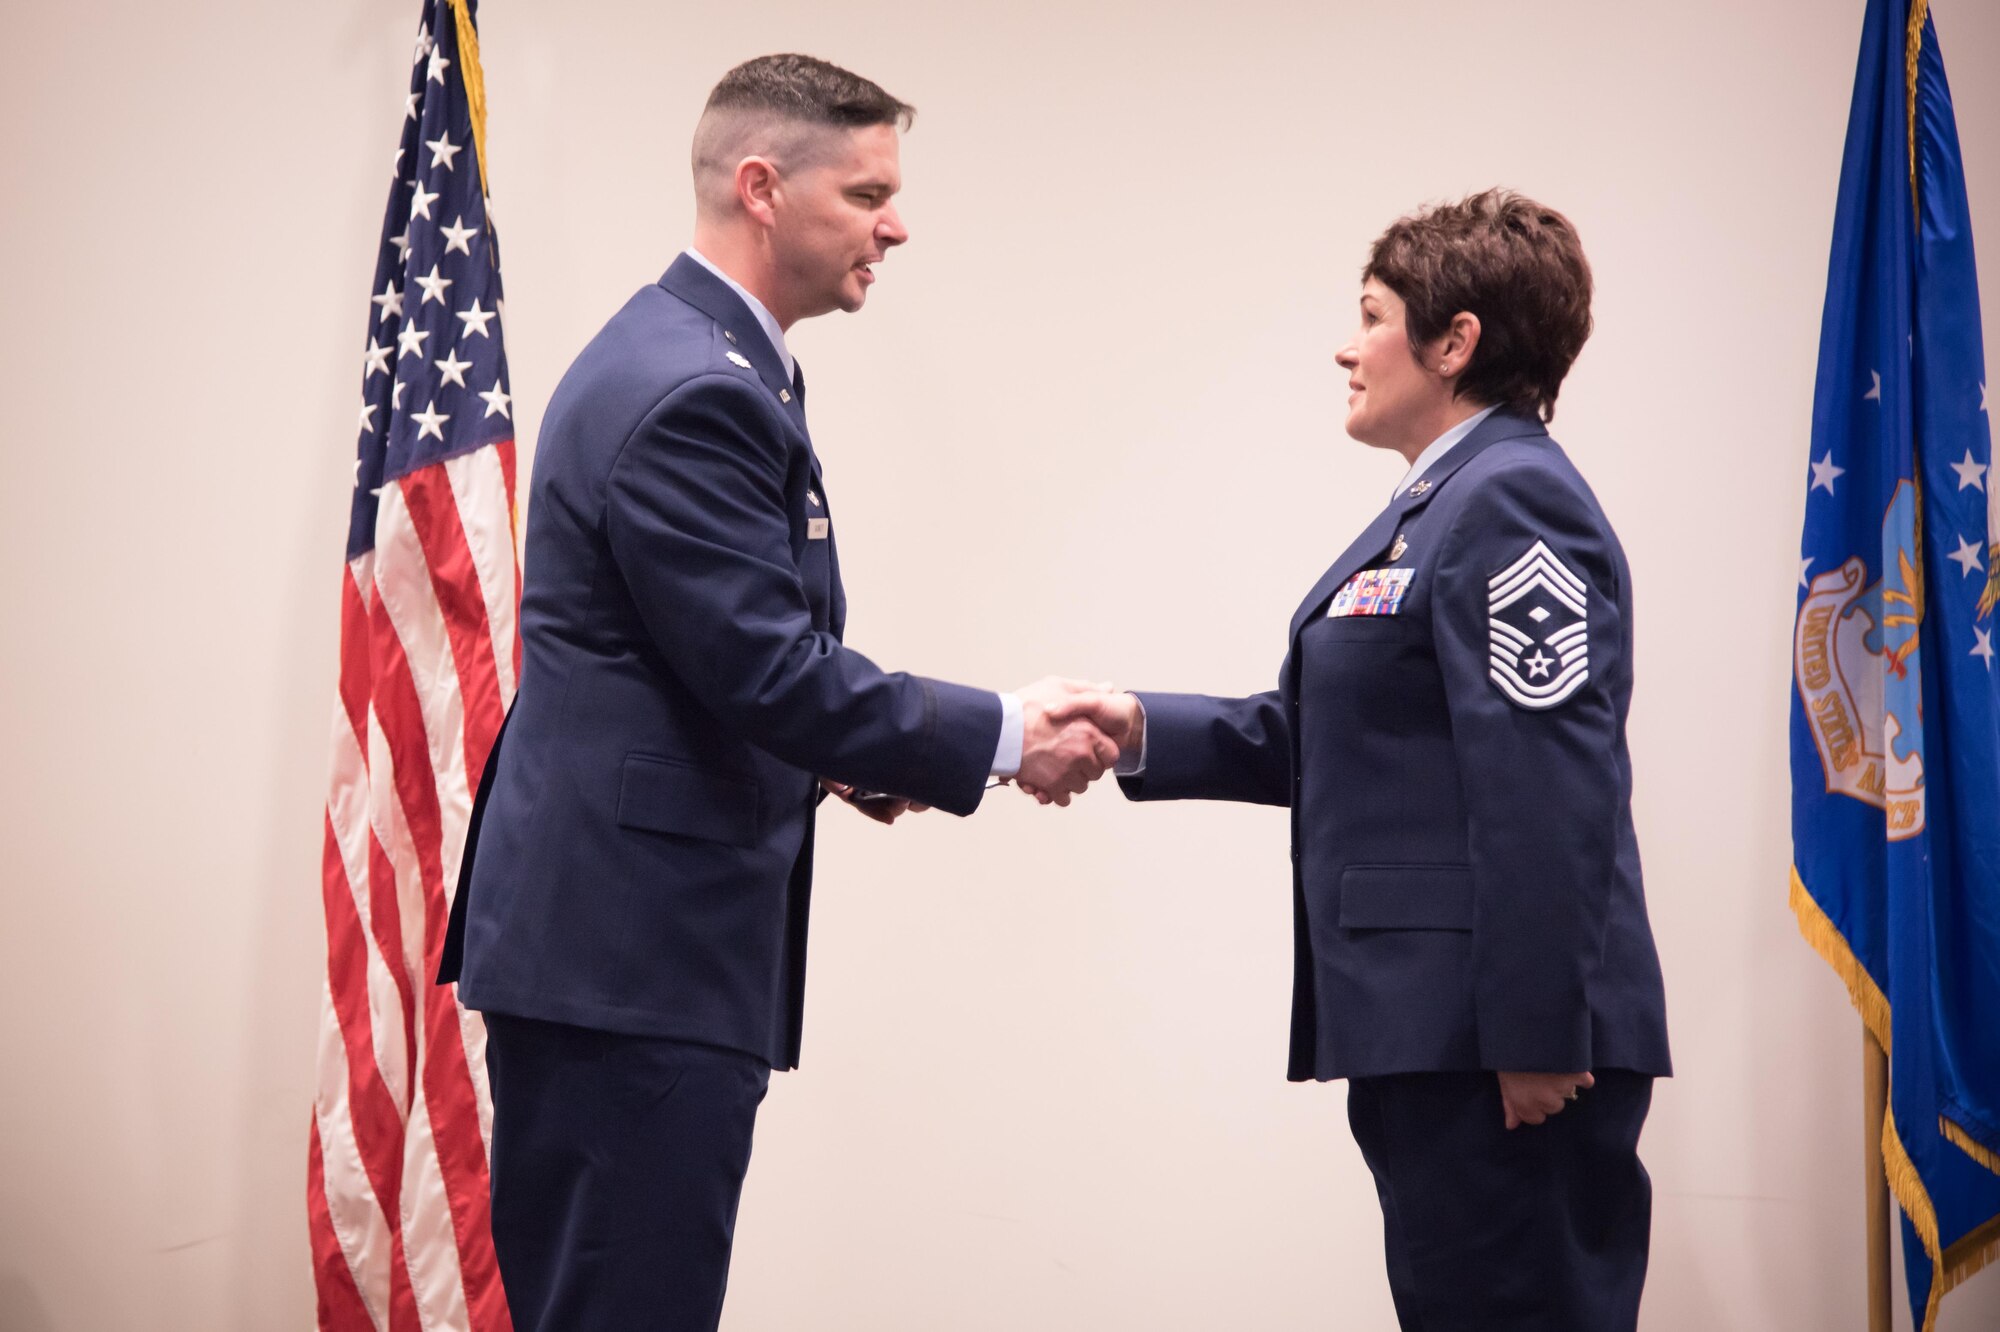 Lt. Col. Quinten Sasnett, 403rd Maintenance Squadron commander shakes the hand of Chief Master Sgt. Michelle Santiago, 403rd MXS first sergeant, during her promotion ceremony Feb. 11 at Keesler Air Force Base, Mississippi.(U.S. Air Force photo/Staff Sgt. Heather Heiney)